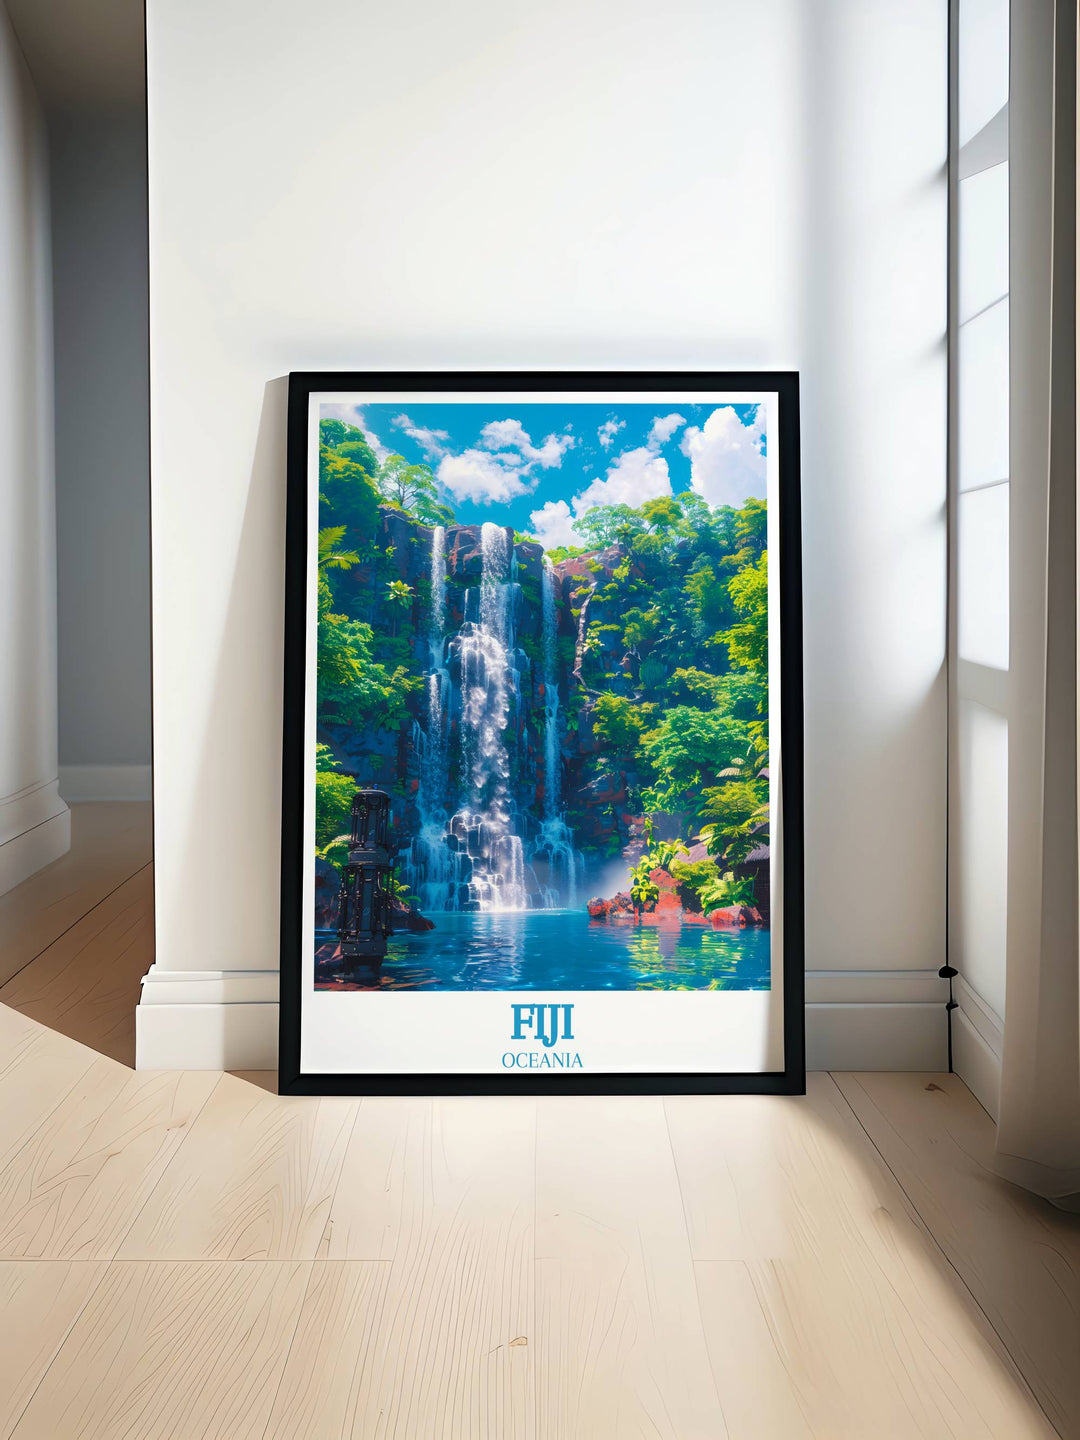 Tranquil Tavoro Falls Fiji Travel Print capturing the serene beauty and lush greenery of Fijis iconic waterfall perfect for enhancing any home decor with a touch of nature